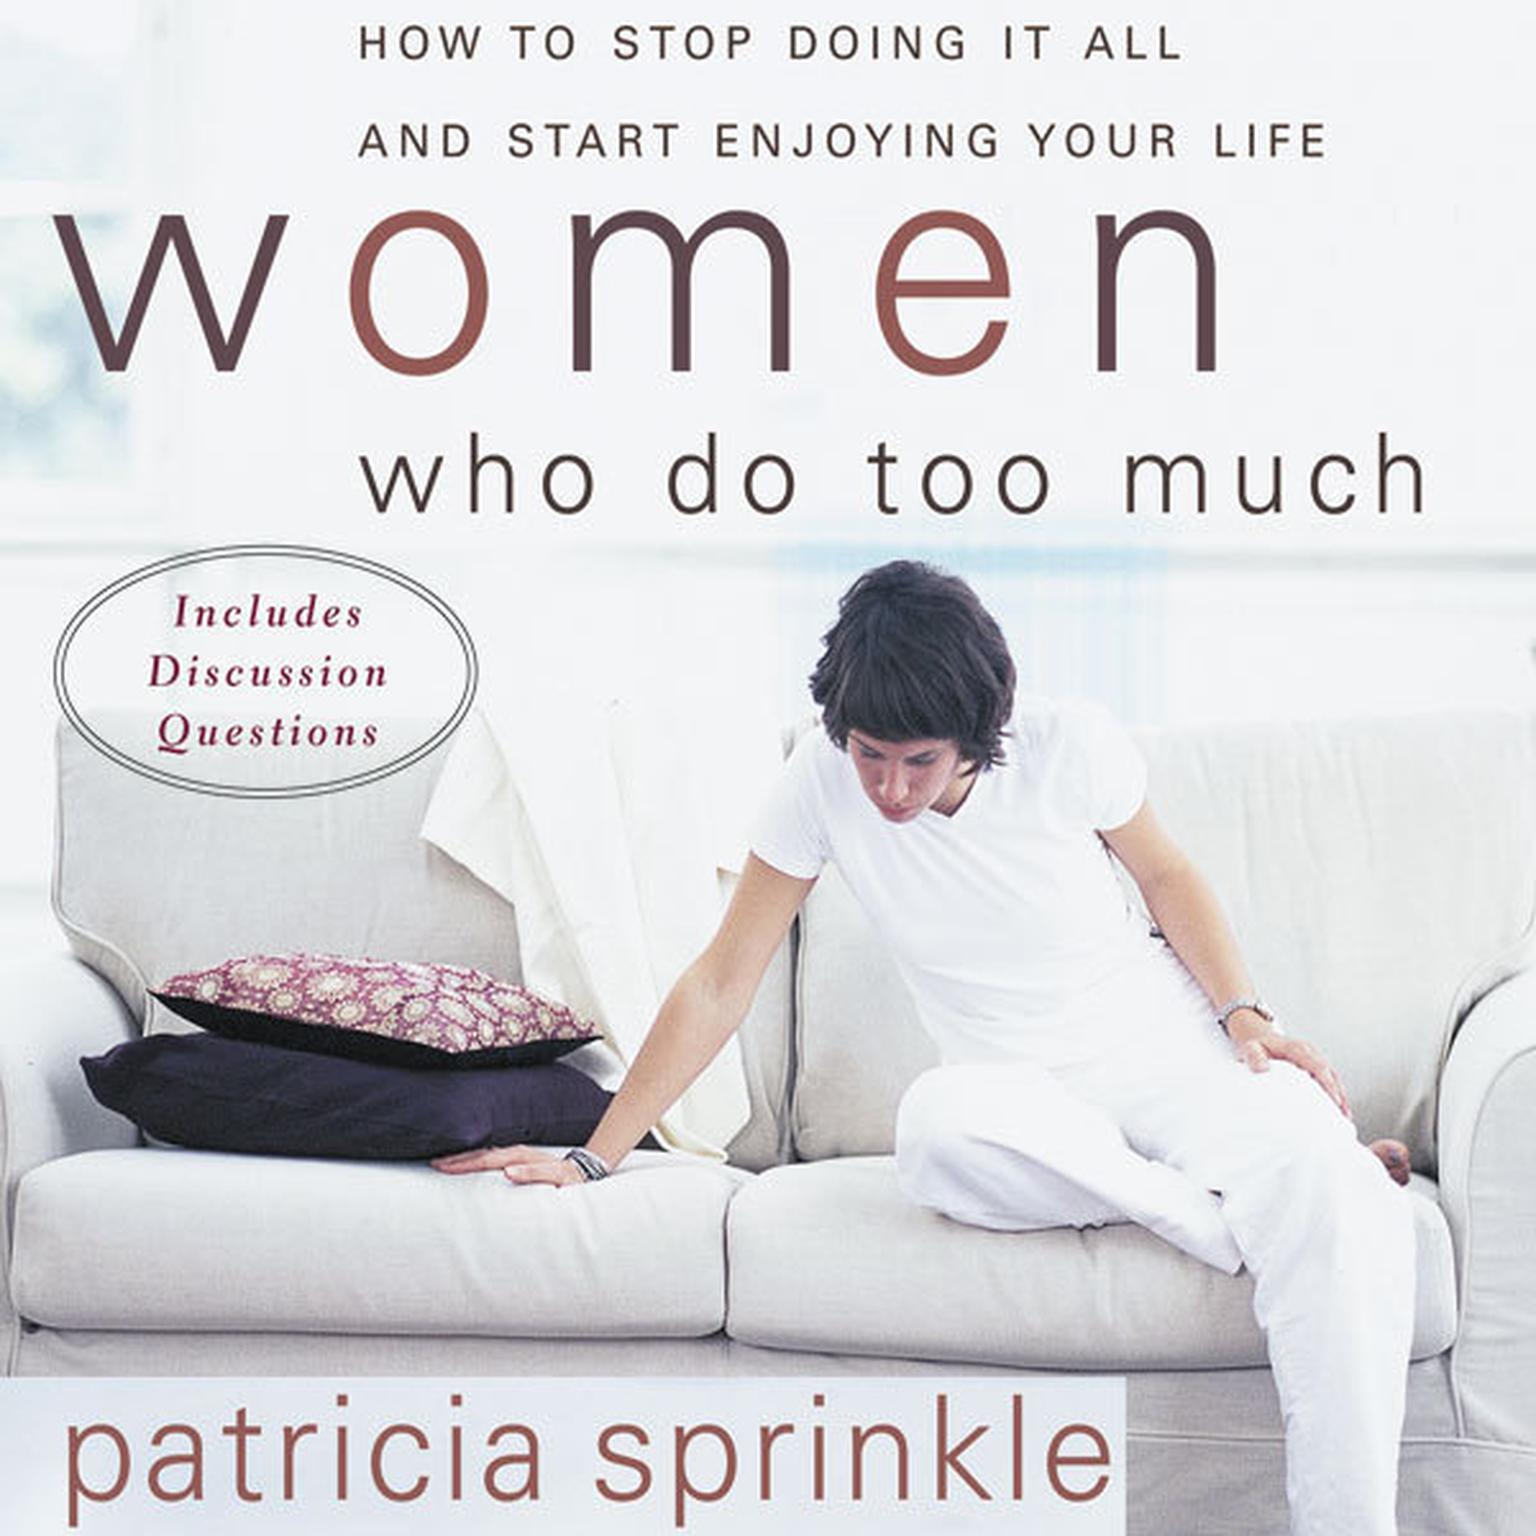 Women Who Do Too Much (Abridged): How to Stop Doing It All and Start Enjoying Your Life Audiobook, by Patricia Sprinkle